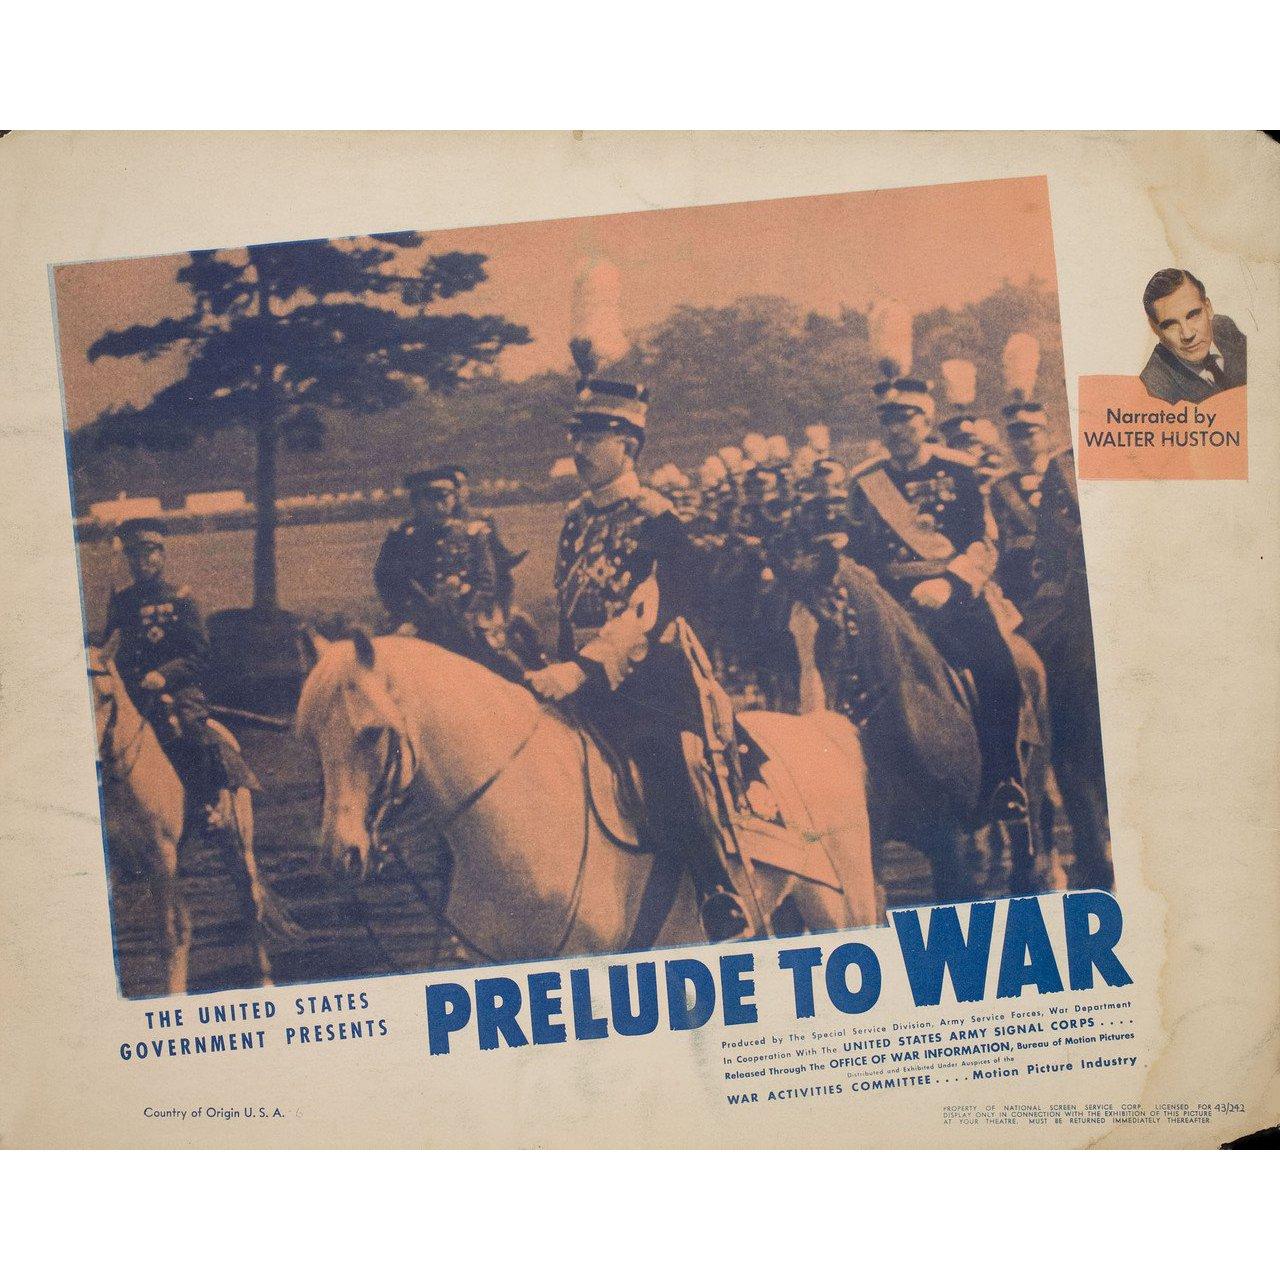 Original 1943 U.S. scene card for the documentary film Prelude to War (Why We fight: Prelude to War) directed by Frank Capra / Anatole Litvak with Kai-Shek Chiang / Walter Darre / Otto Dietrich / Hans Frank. Very good condition. Please note: the